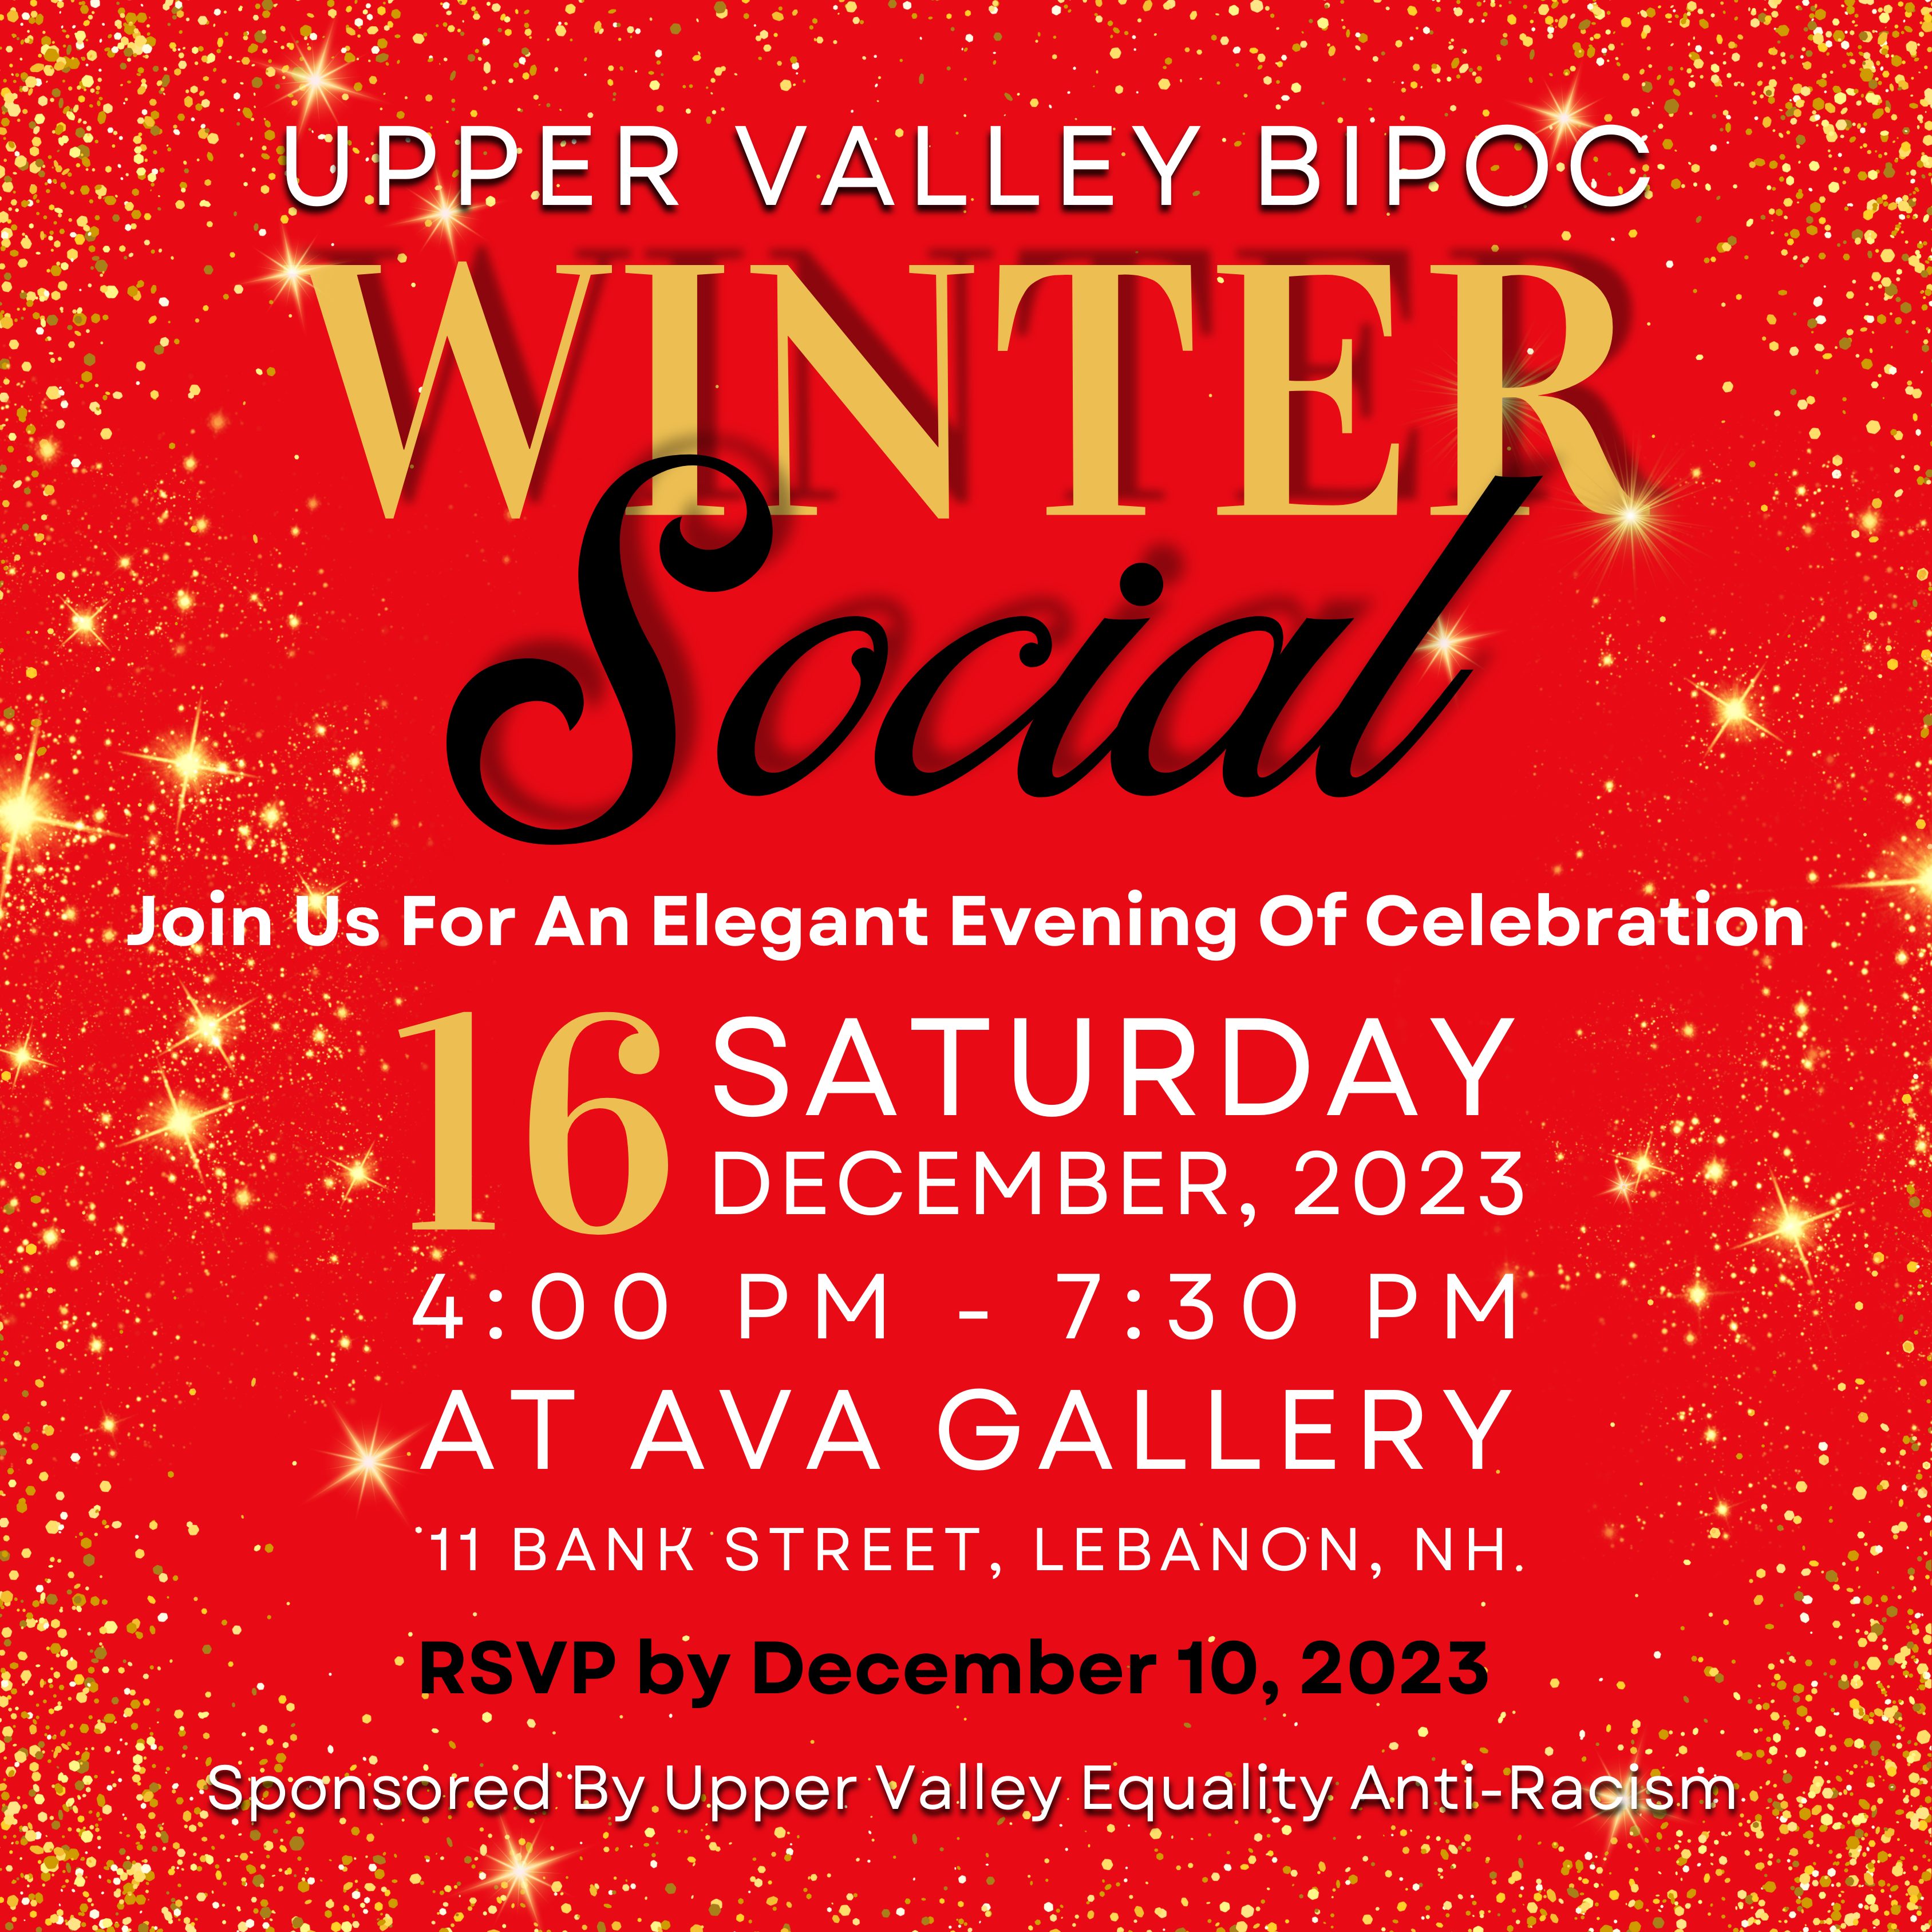 Upper Valley BIPOC Network Winter Social 2023 at AVA Gallery in Lebanon, NH